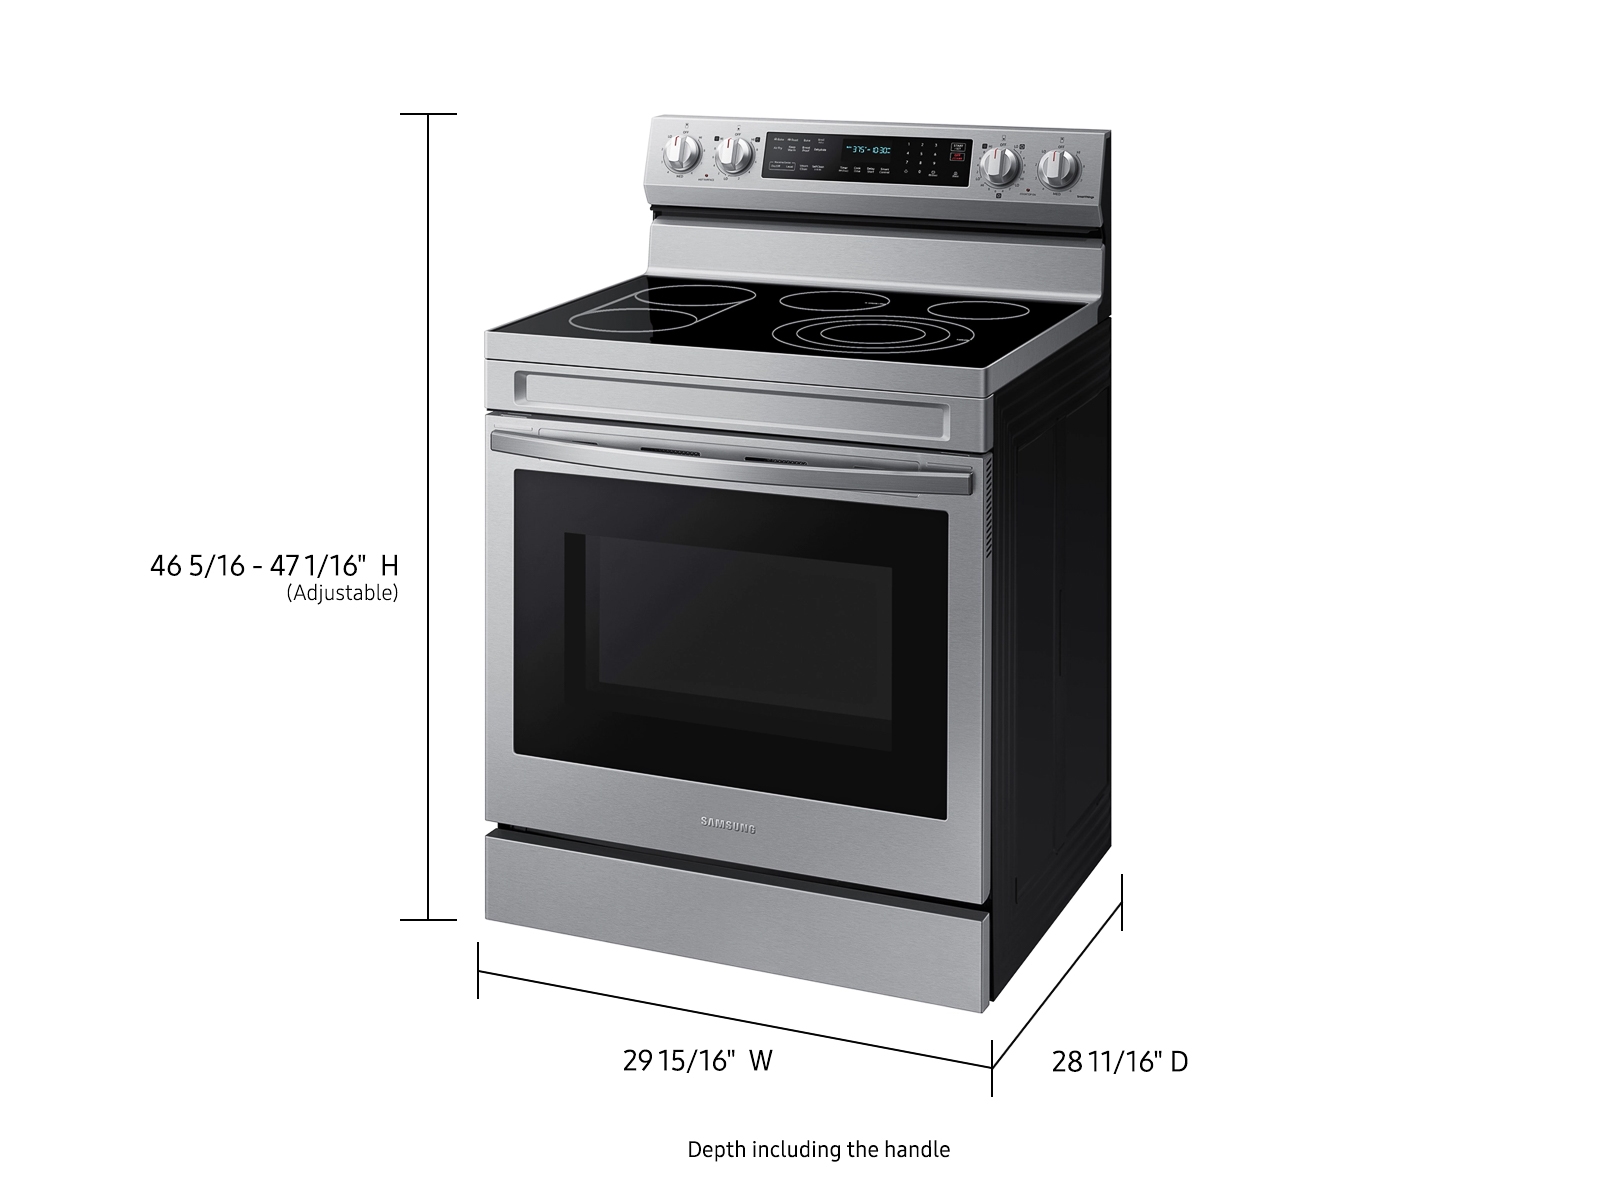 5.3 cu. ft. Electric Range with Keep Warm Setting, Rent To Own Stoves